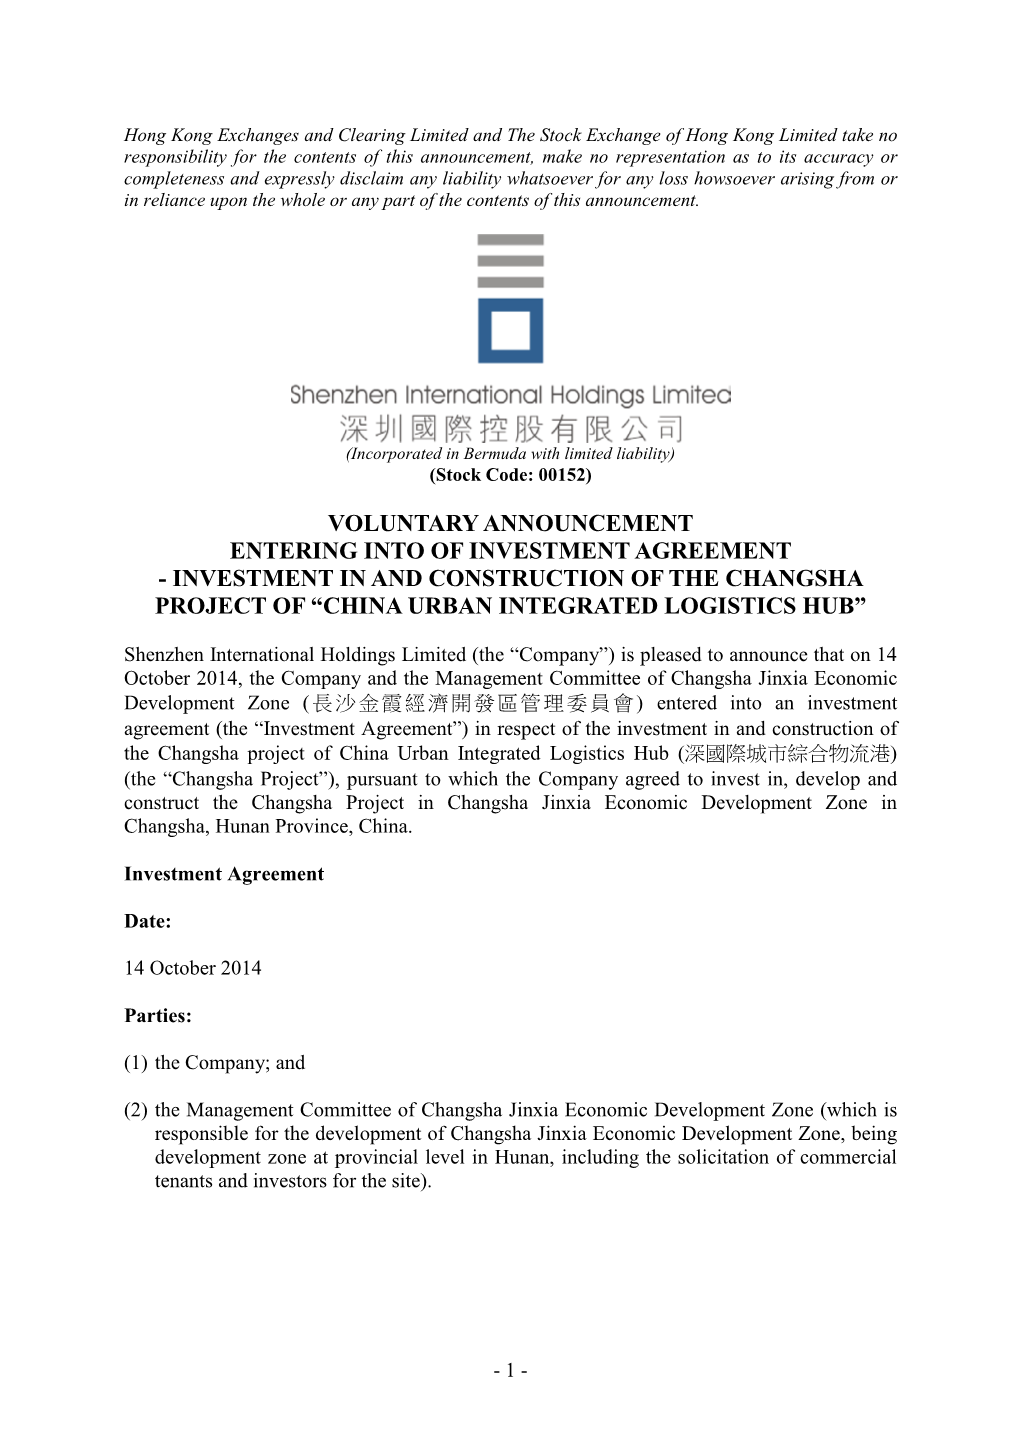 Voluntary Announcement Entering Into of Investment Agreement - Investment in and Construction of the Changsha Project of “China Urban Integrated Logistics Hub”